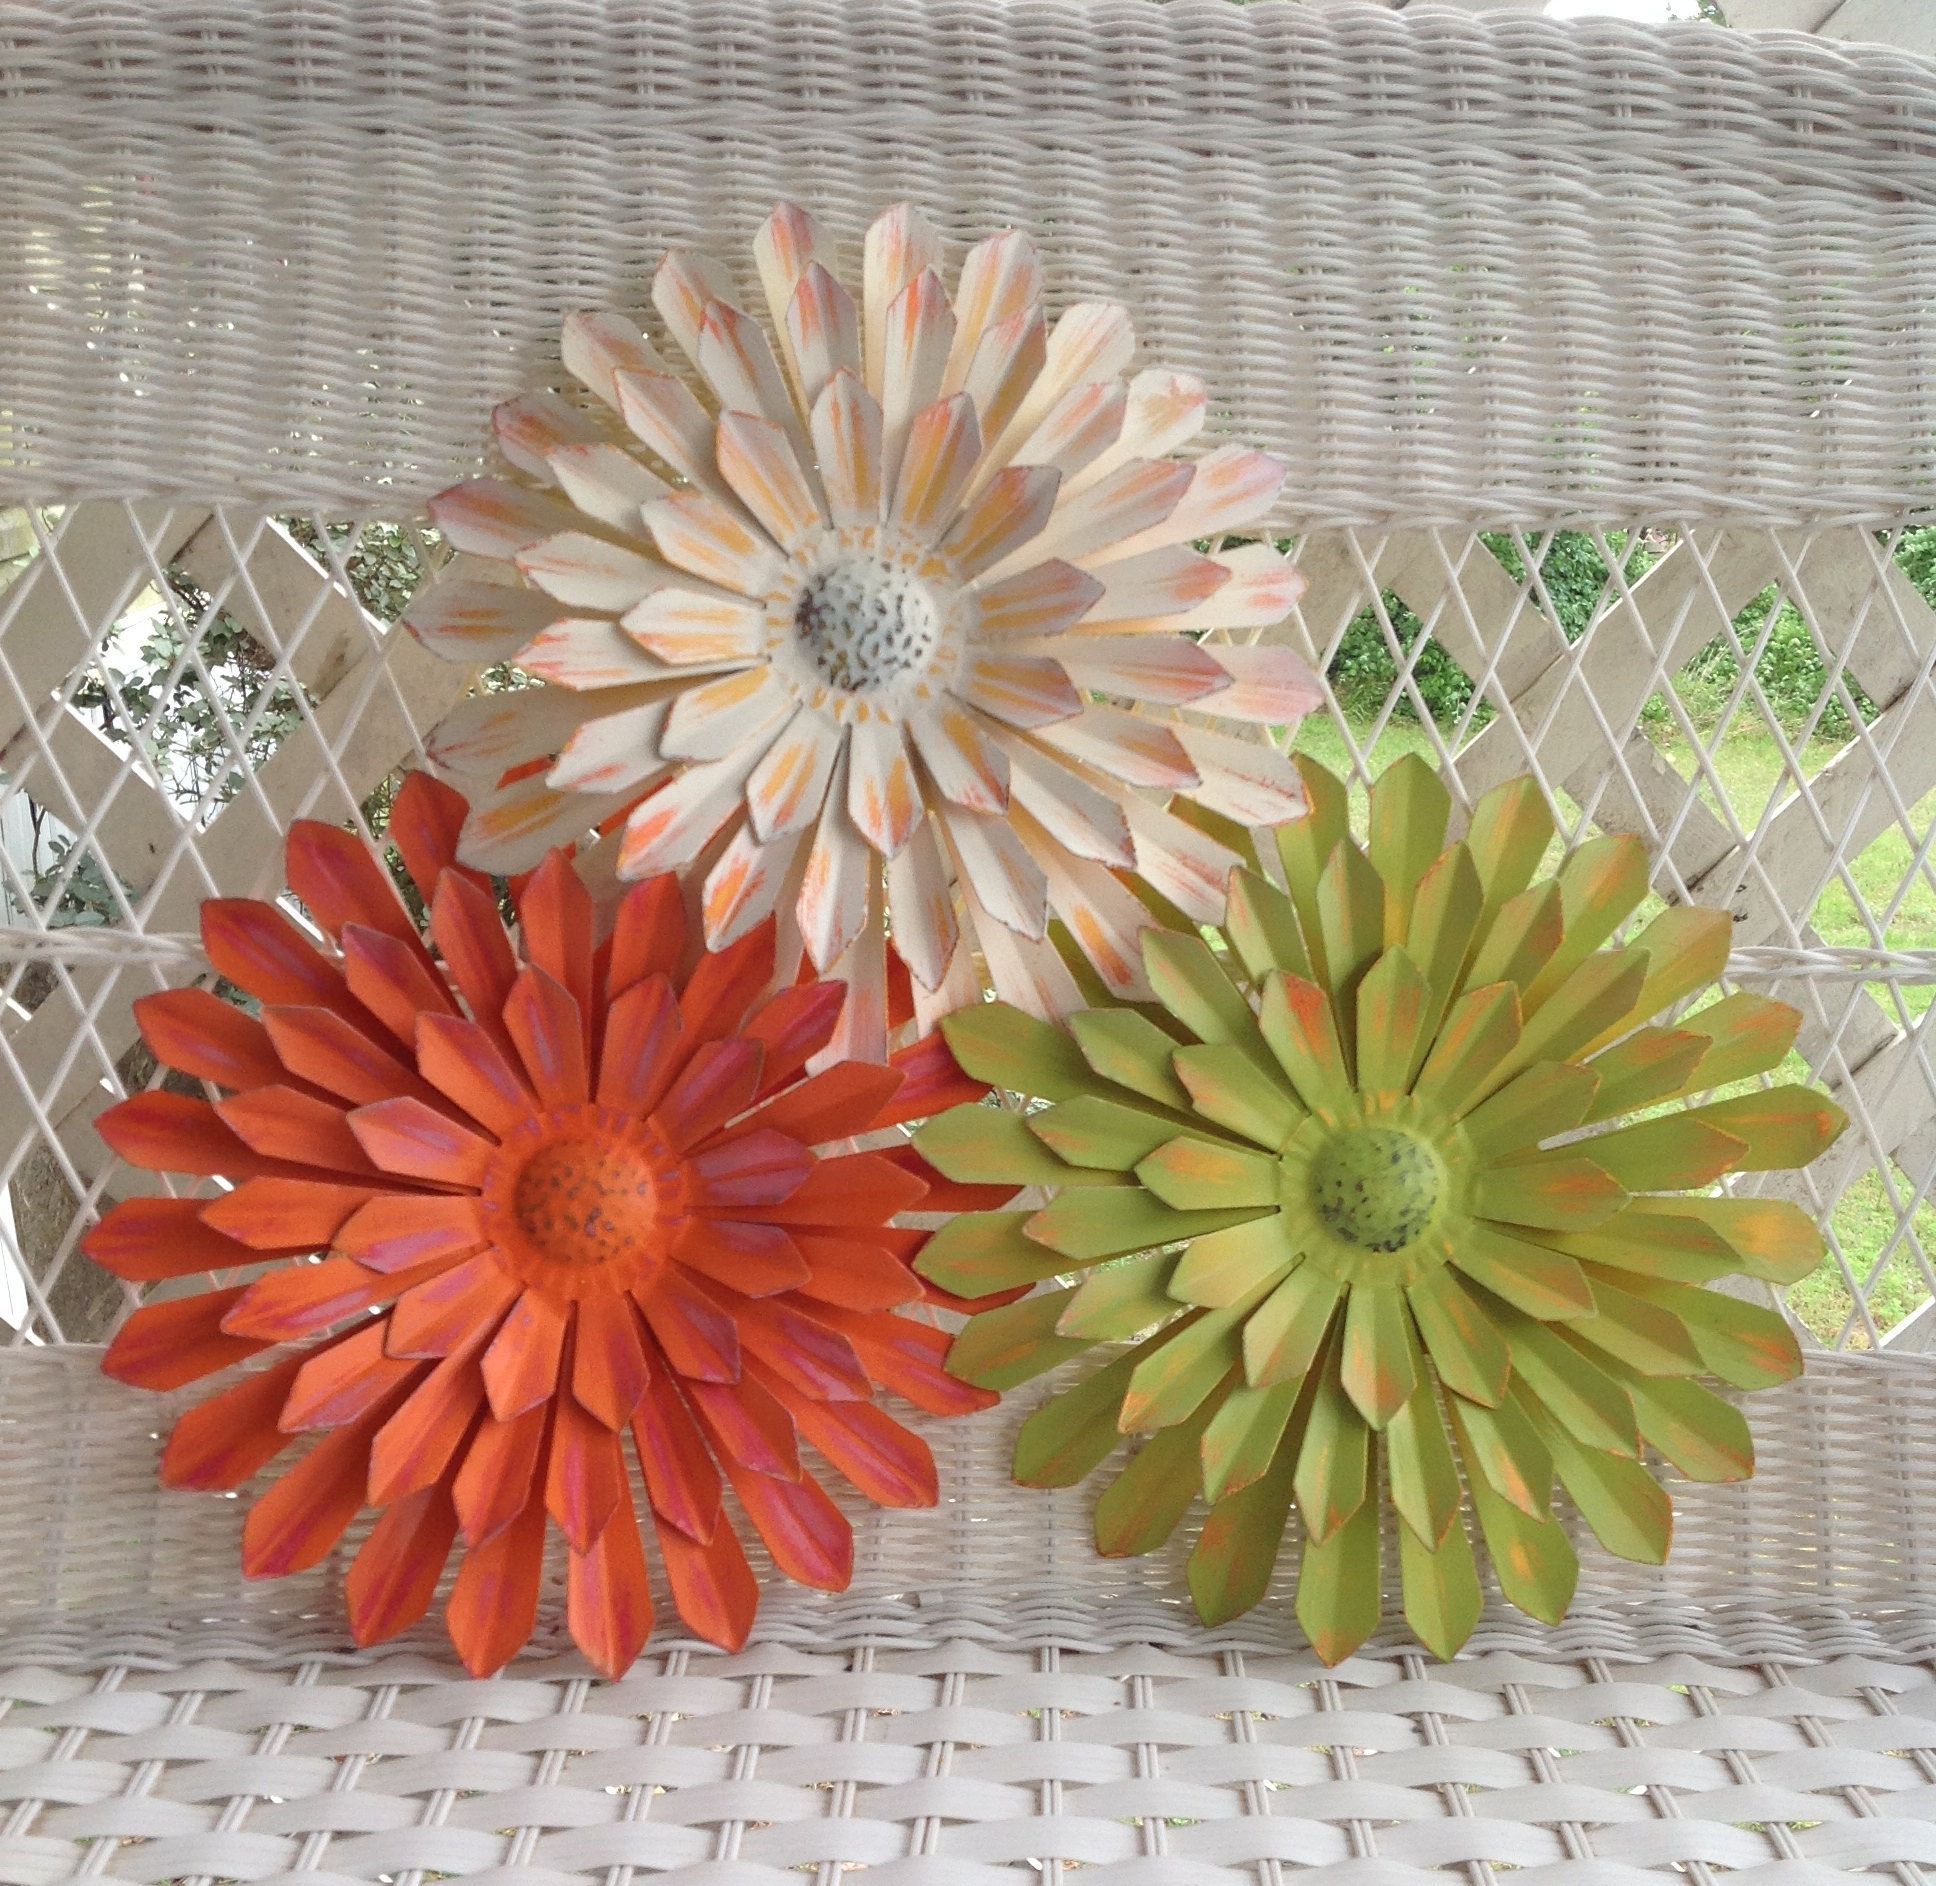 12" Metal Flower Wall & Fence Decor – White/orange/green Within Metal Flower Wall Decor (set Of 3) (View 5 of 30)